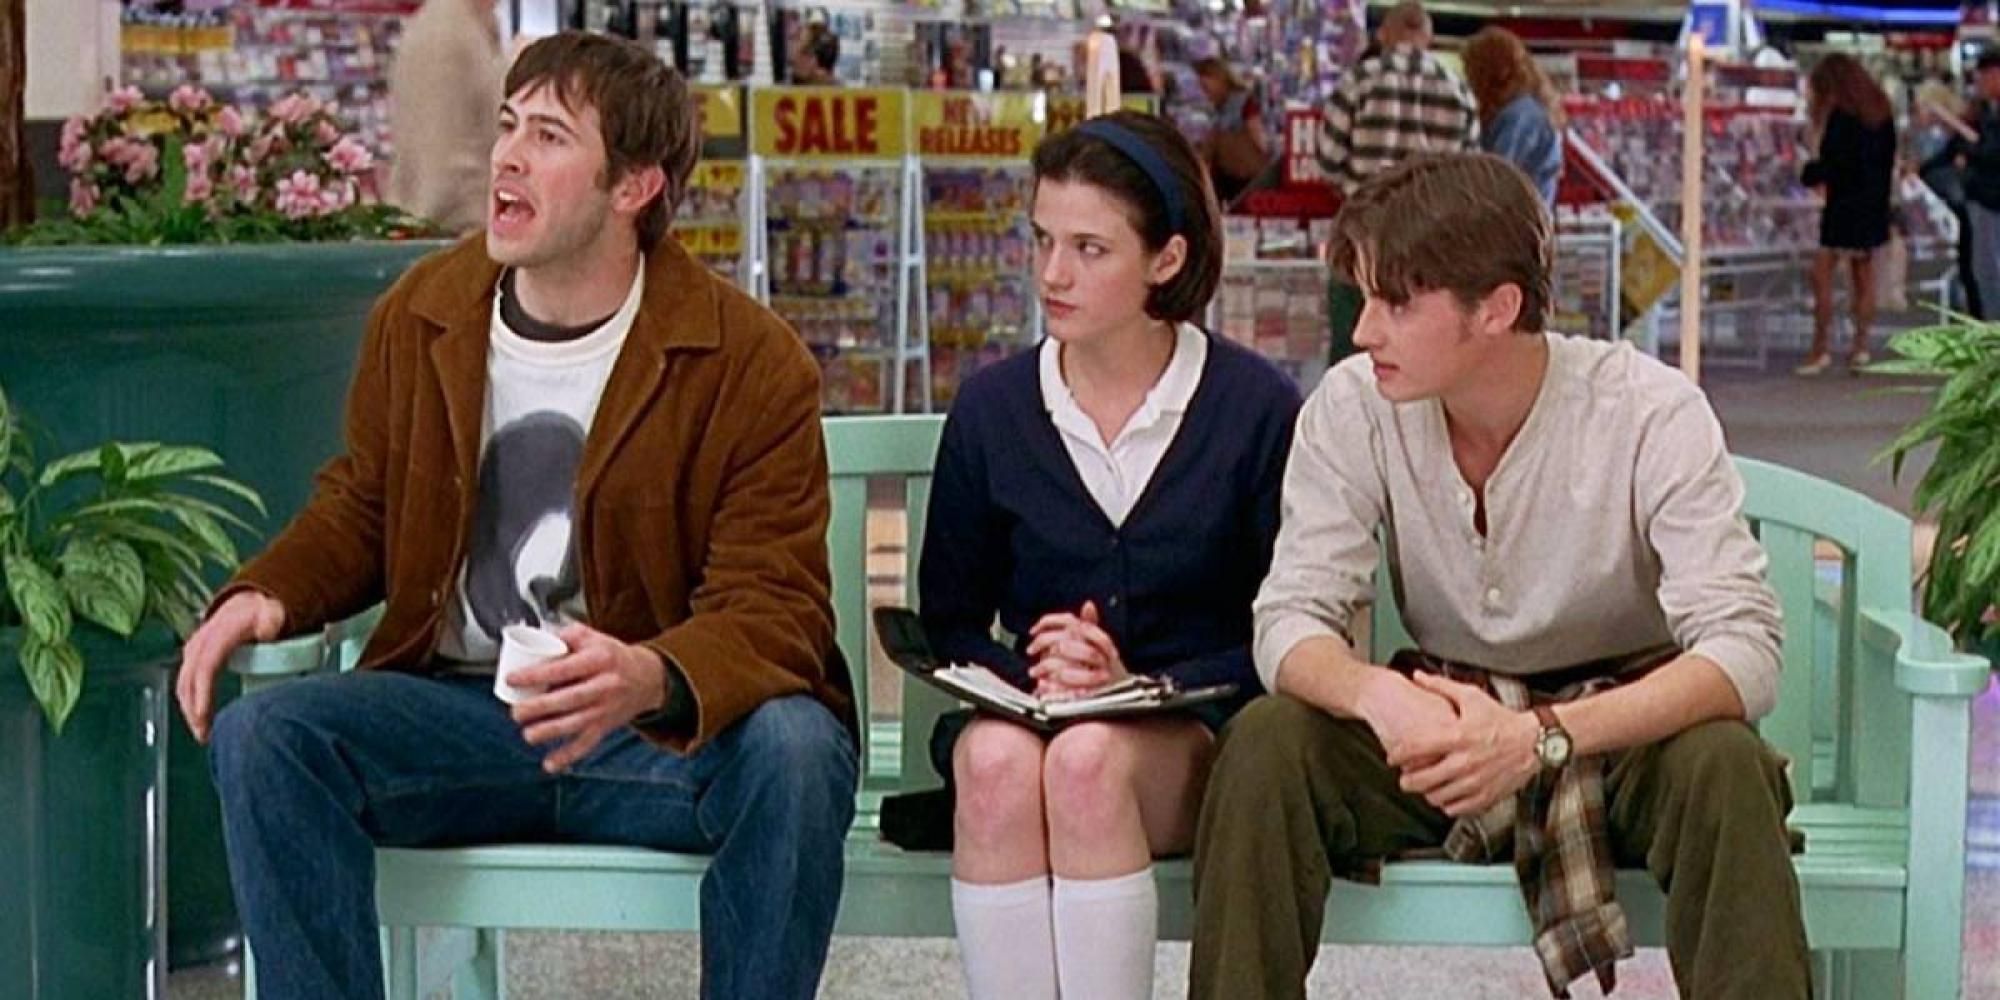 Mallrats characters sitting on a mall bench